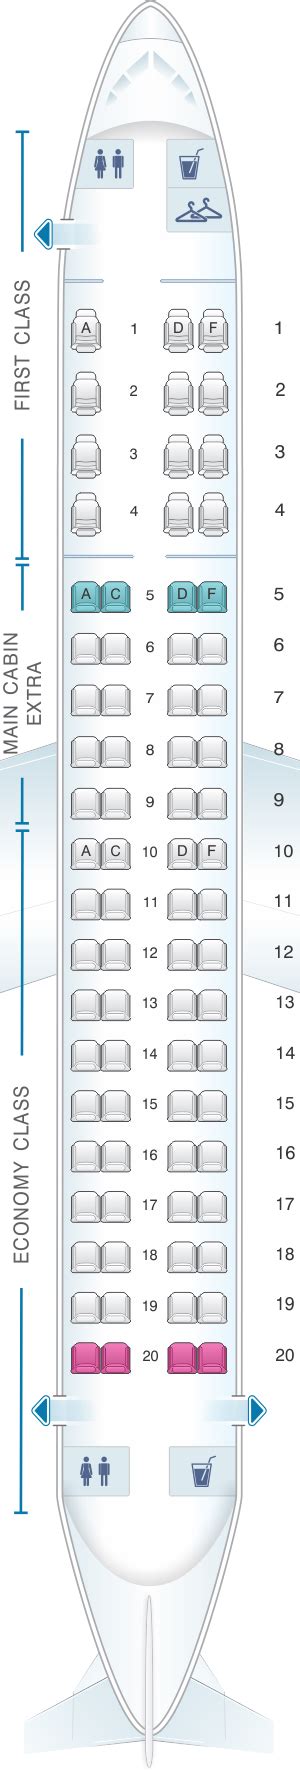 GOOD JOB DELTA!!!!!!!!!! Submitted by SeatGuru User on 2016/04/26 for Seat 5A. For a short haul, I love these Embraer 170/175s. Economy Plus seats are wide and have good leg room. I had a larger woman on the aisle who had her laptop out most of the flight and we were not bumping into each other at all. You could actually work on the plane..